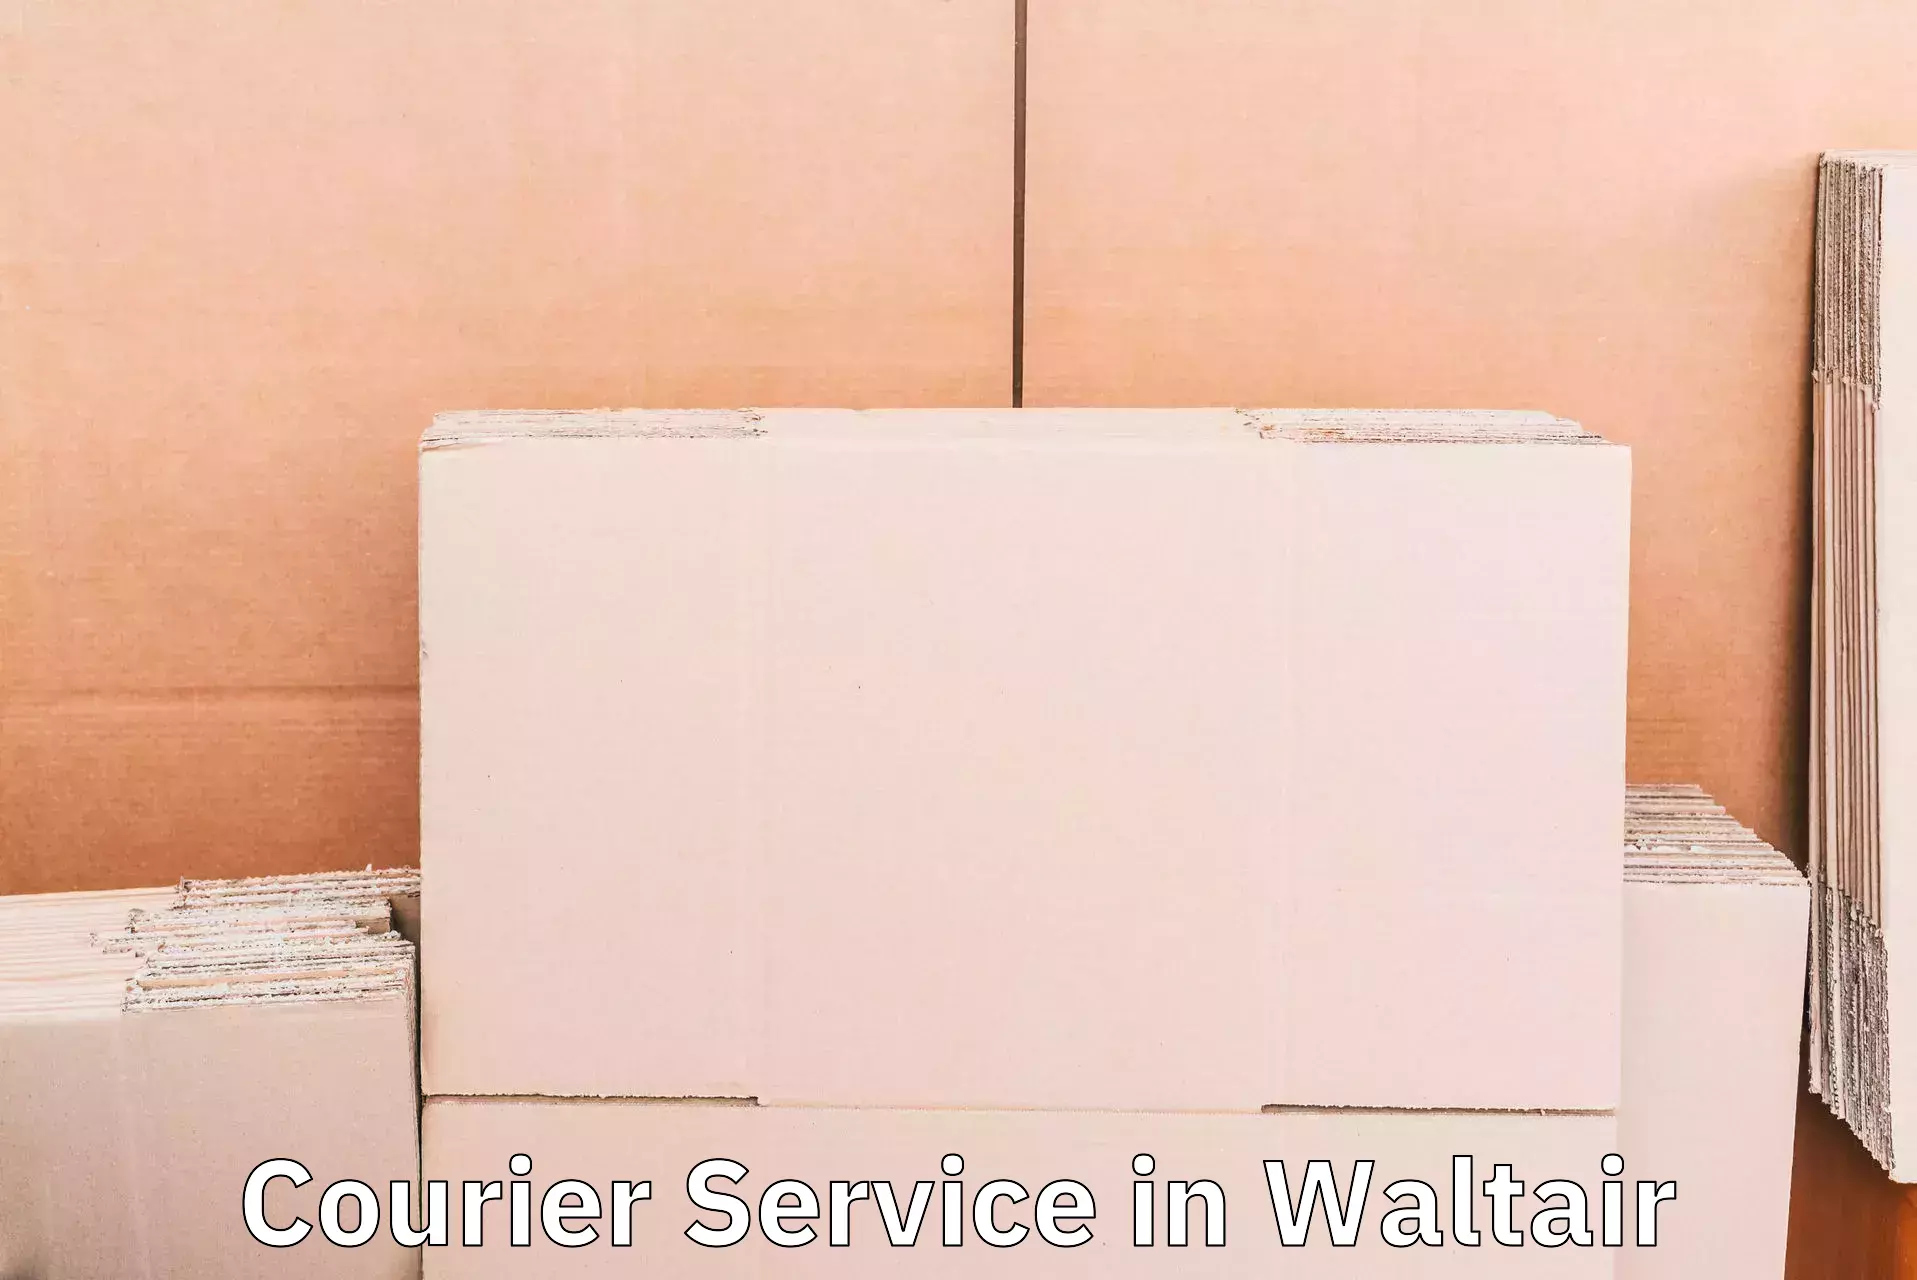 Professional courier services in Waltair